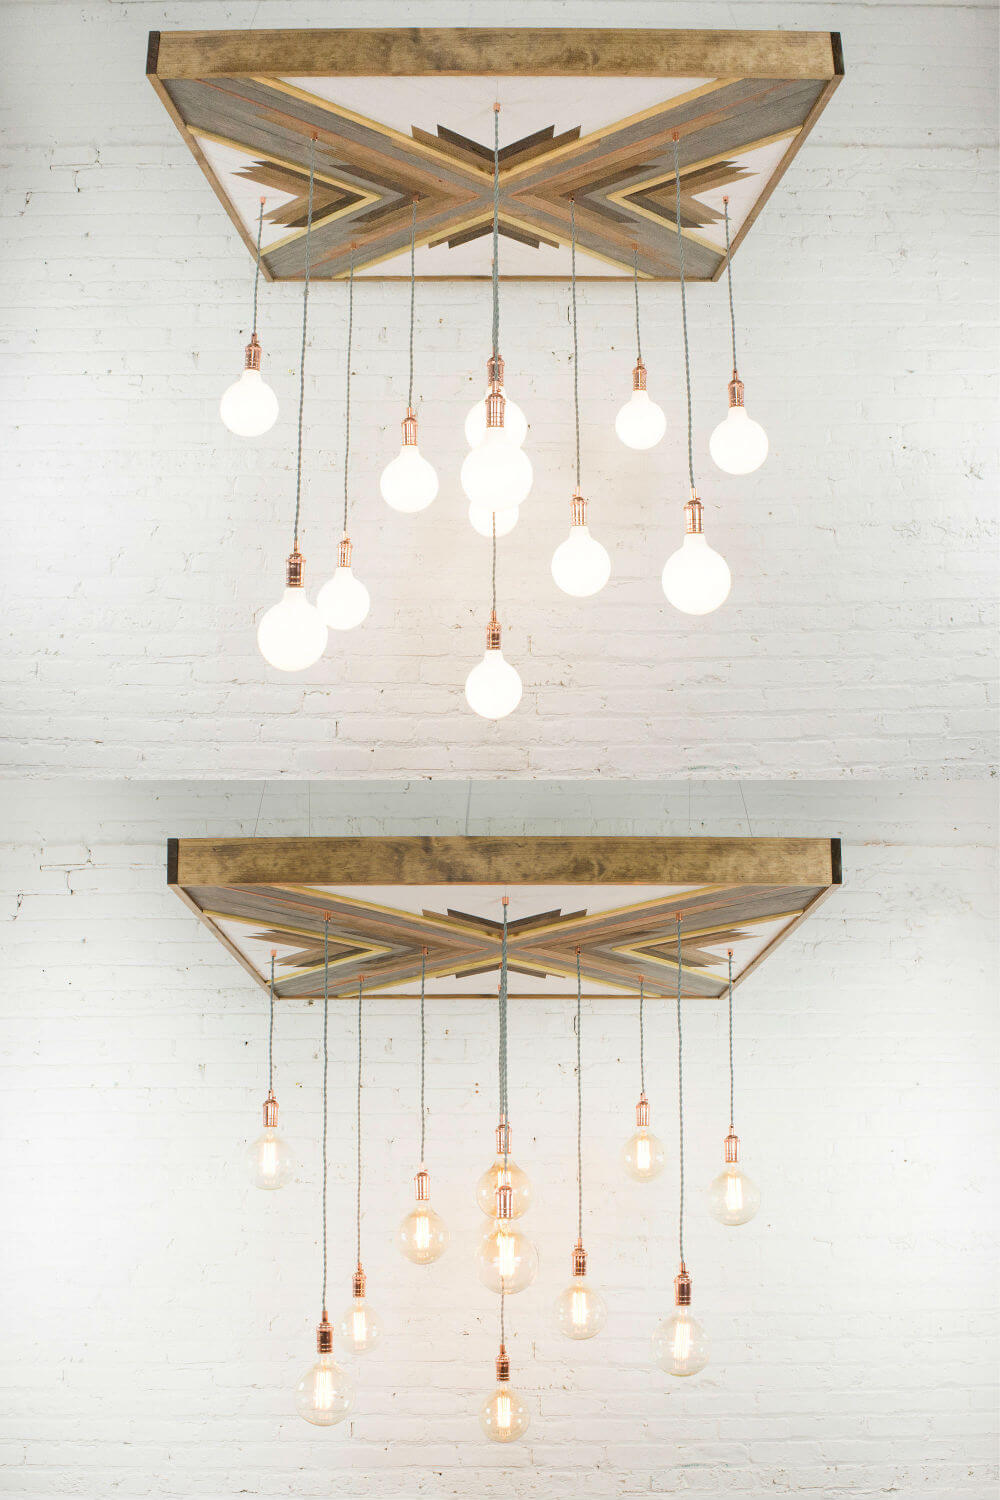 Reclaimed Wood Chandelier with Geometric Artistic Touch